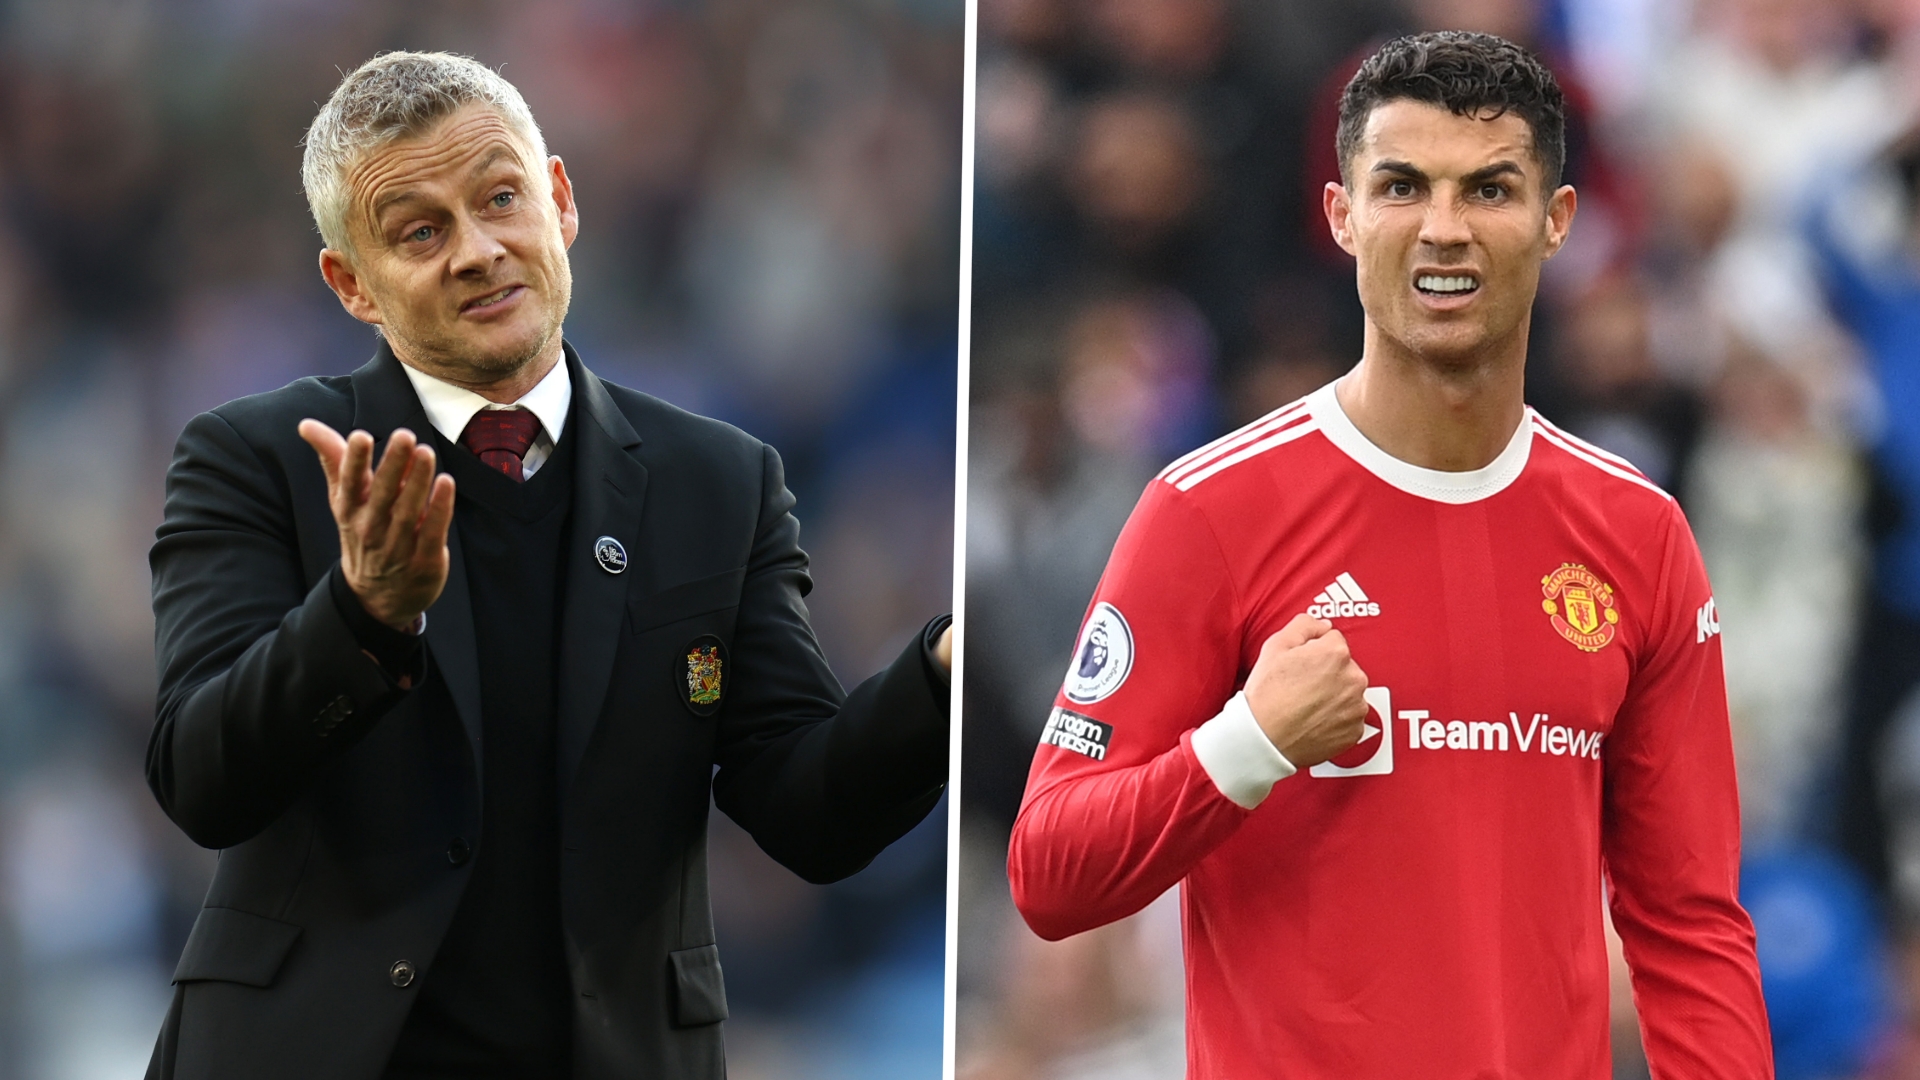 Ronaldo negative influence claims at Man Utd rubbished by Solskjaer